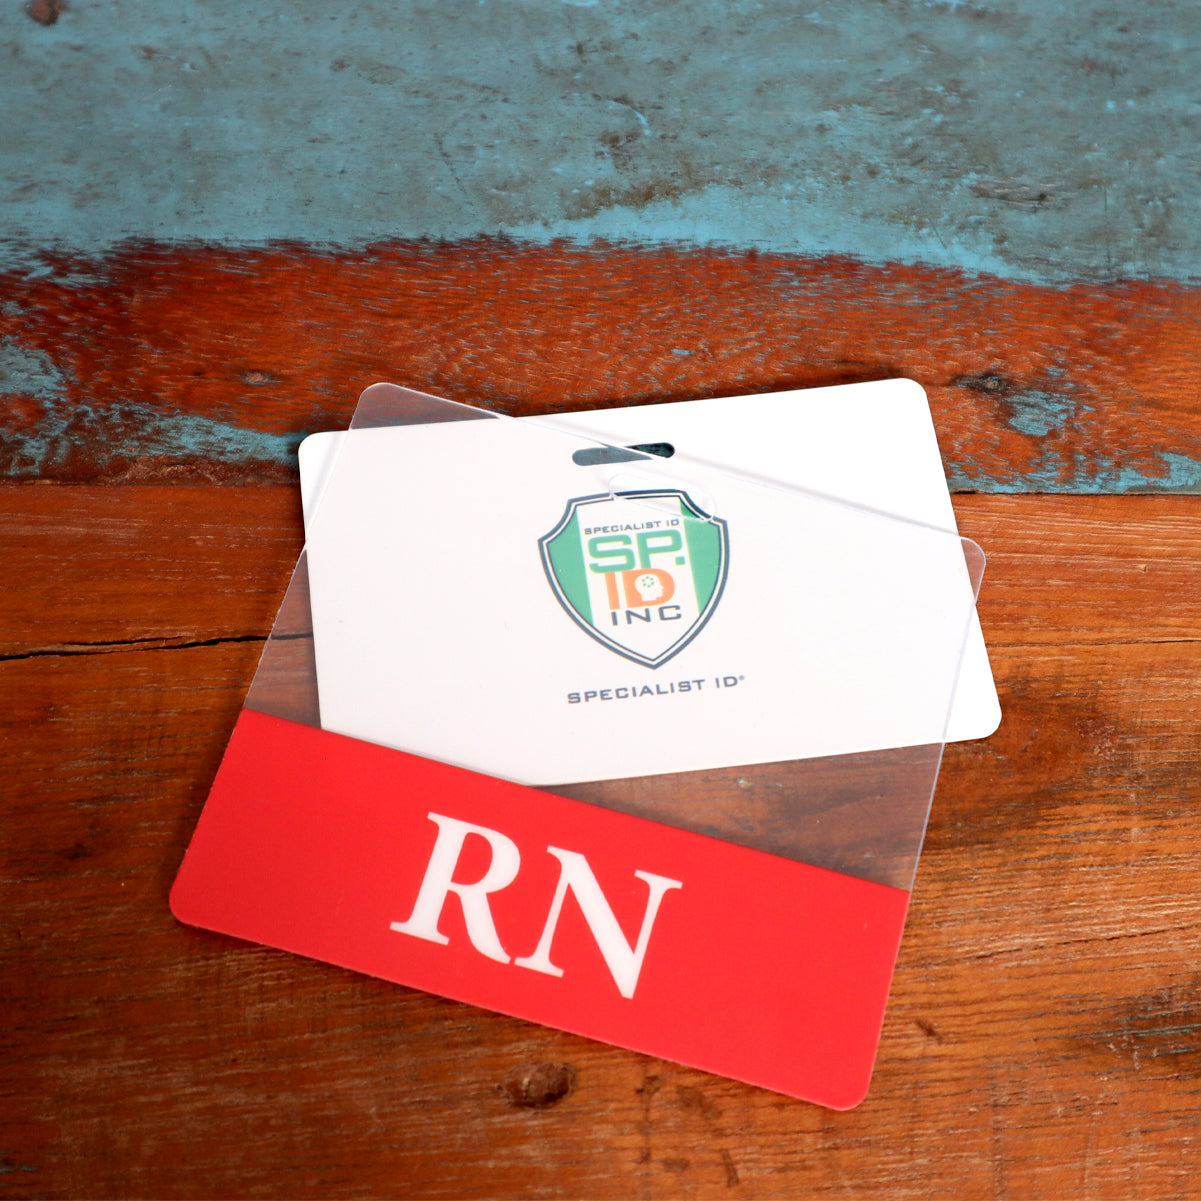 A white ID badge with a green logo and the text "Specialist ID" sits on a wooden surface. A Clear RN Badge Buddy - Horizontal ID Badge Backer for Nurses - Double Sided Print is placed over part of the badge, creating an efficient and professional display.